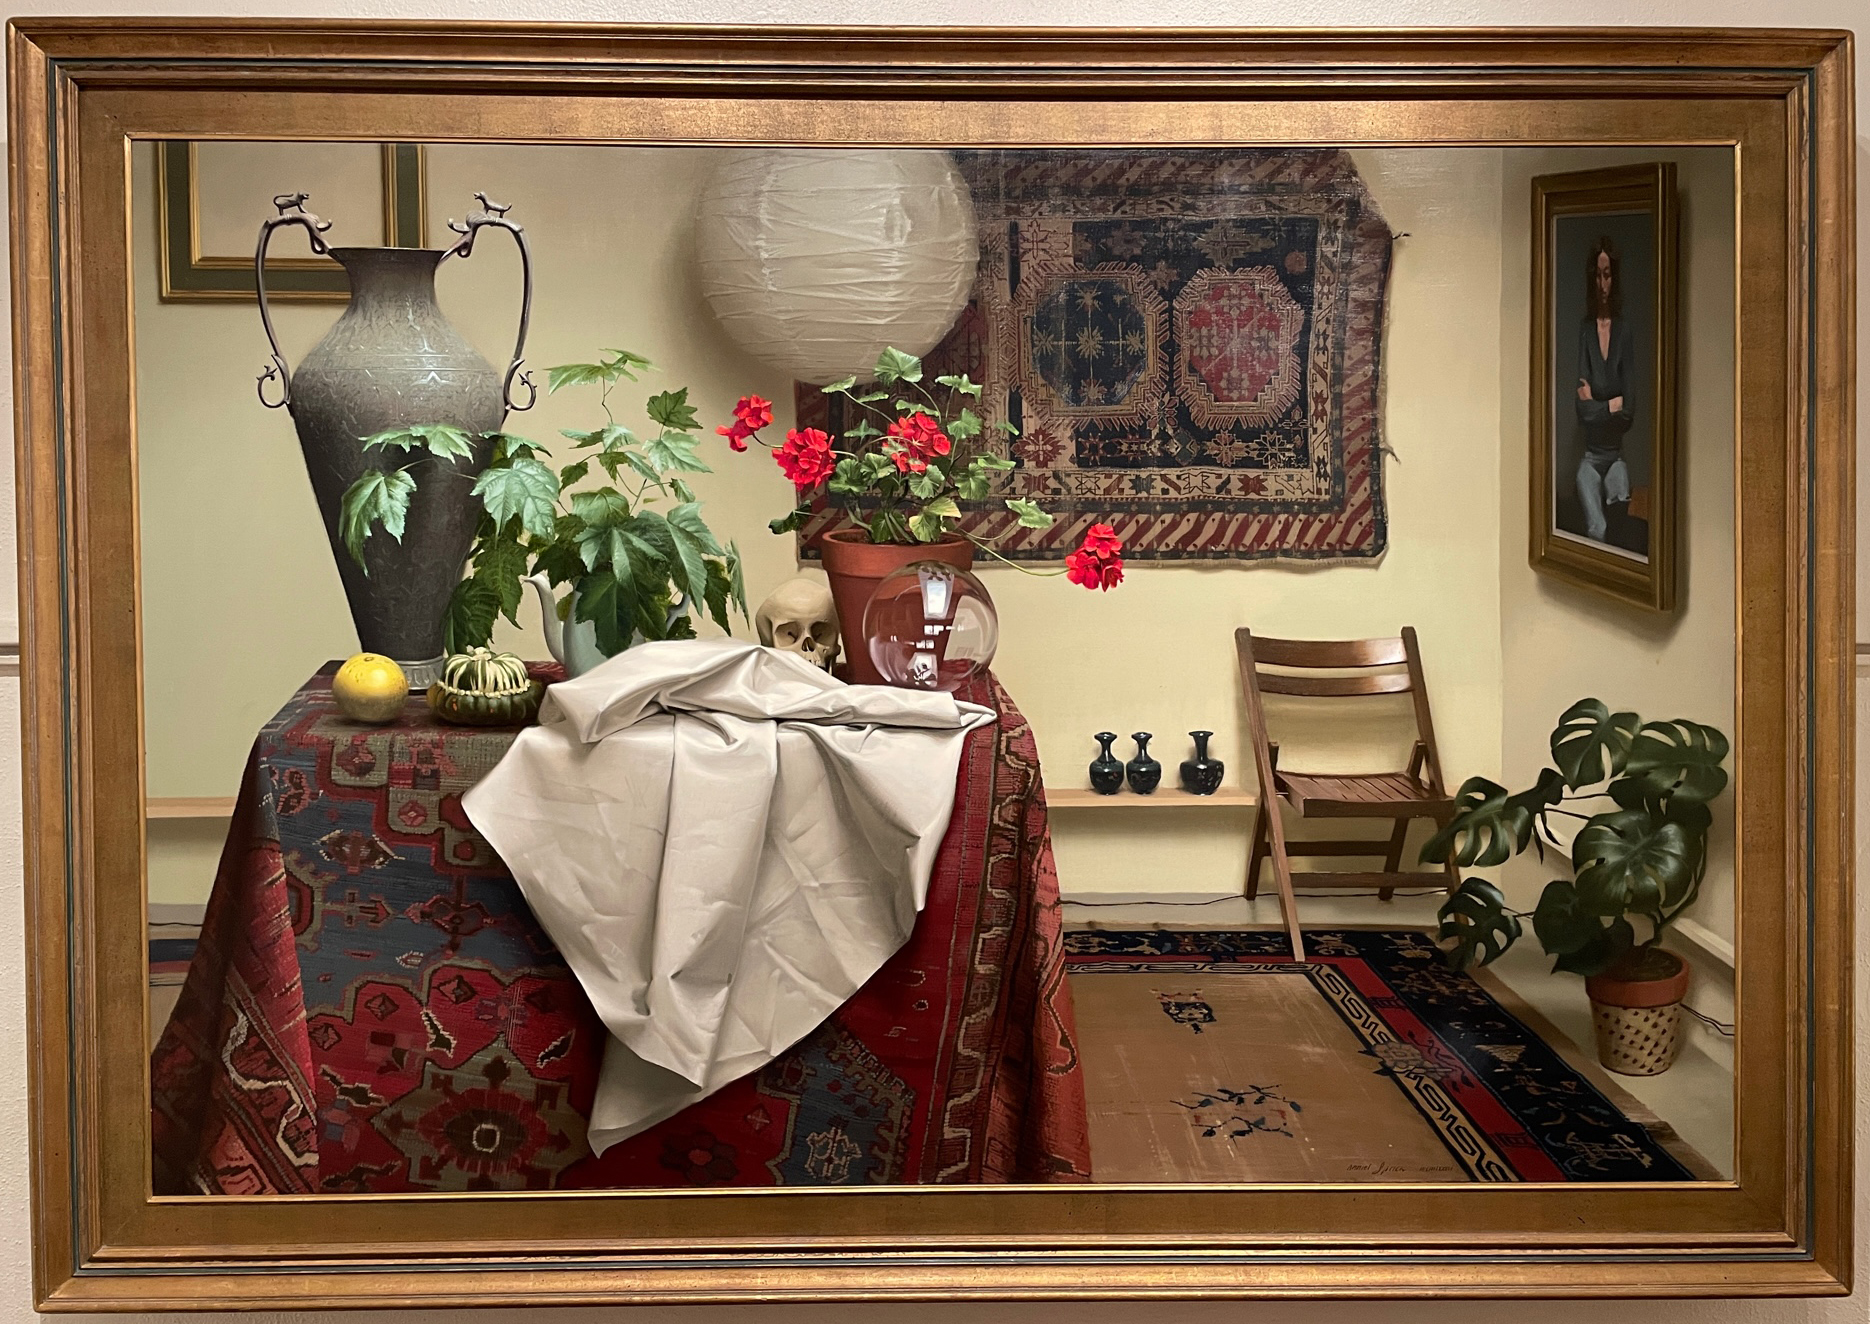 

											On View New York</b>

											<em>
												The Grand Manner</em> 

											<h4>
												Through May 25, 2023											</h4>

		                																																													<i>Daniel Sprick, Mysteries of Existence,</i>  
																																								1986, 
																																								Oil on canvas, 
																																								50 x 76 inches 
																								
		                				